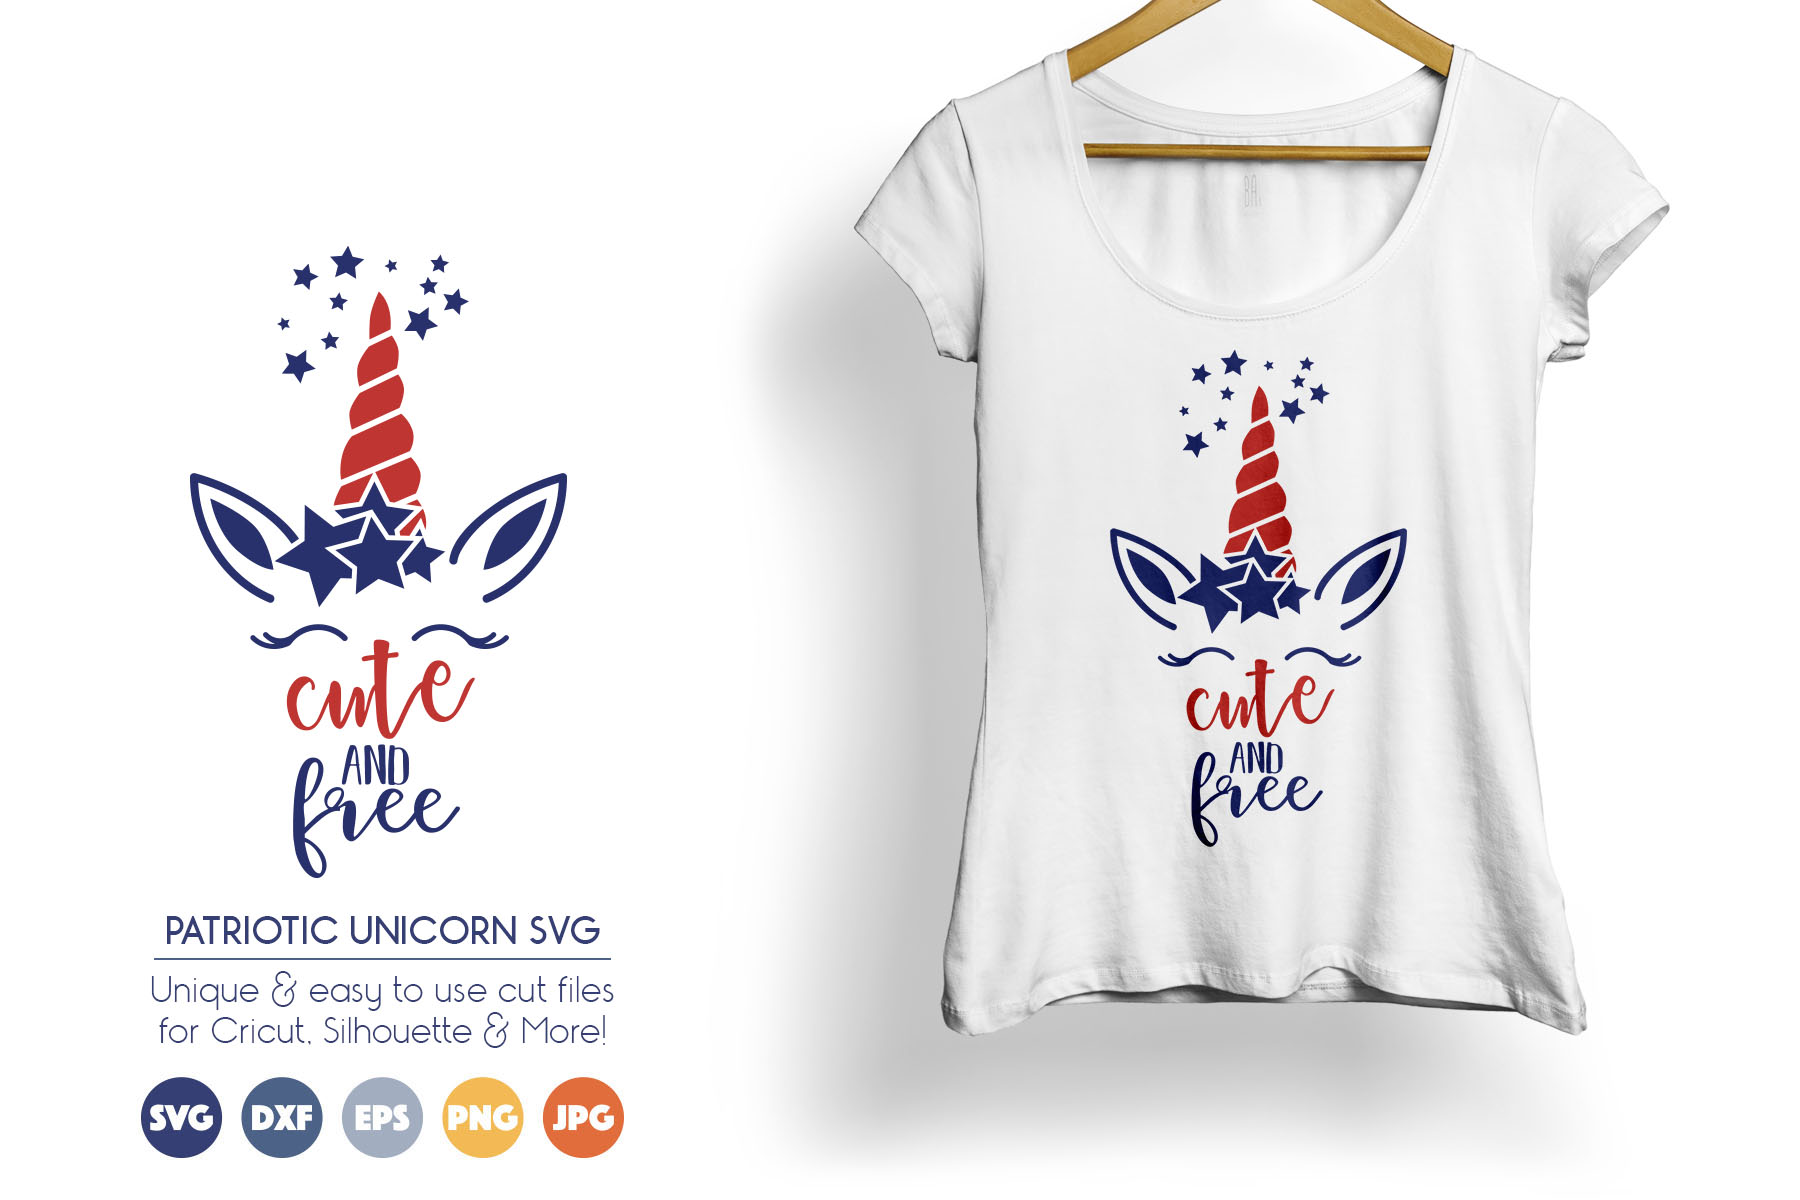 Download Patriotic Unicorn SVG Cut Files - July 4th - Cute and Free